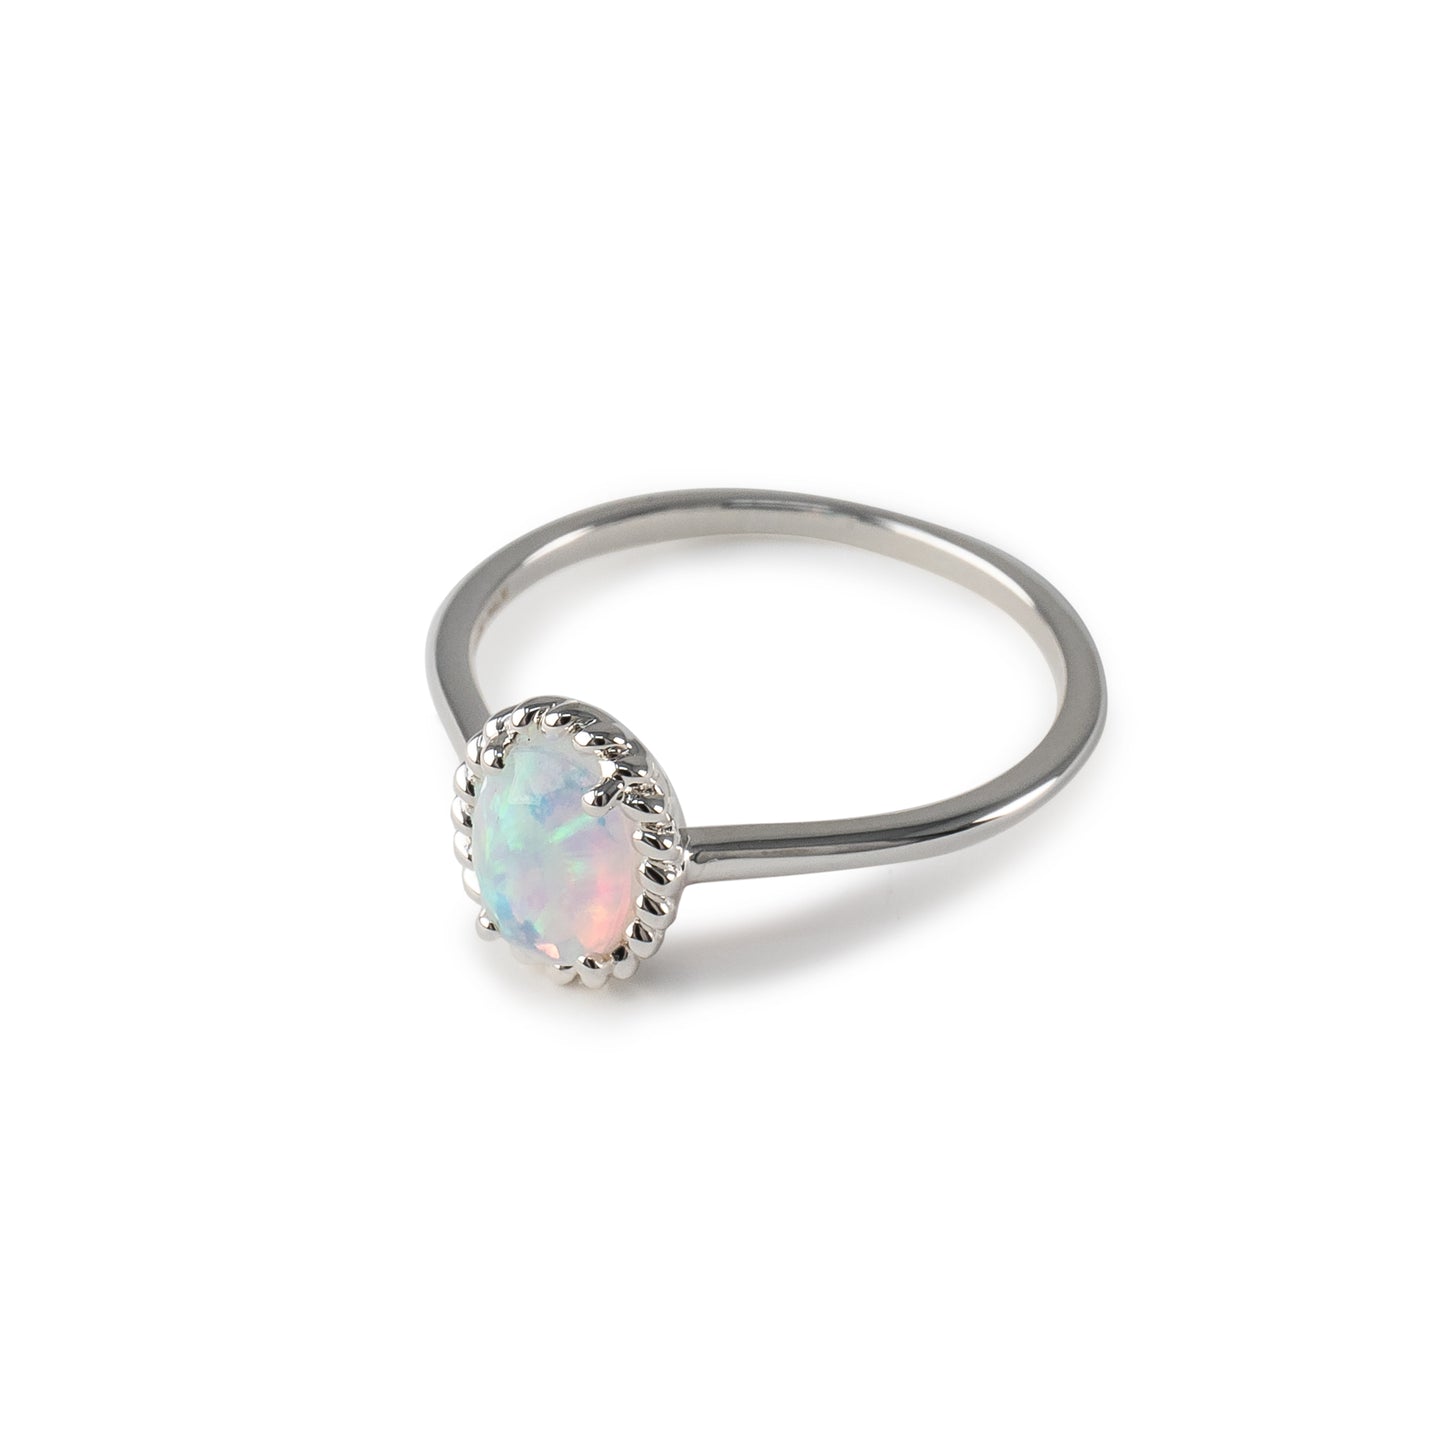 Oval White Opal Ring in Sterling Silver